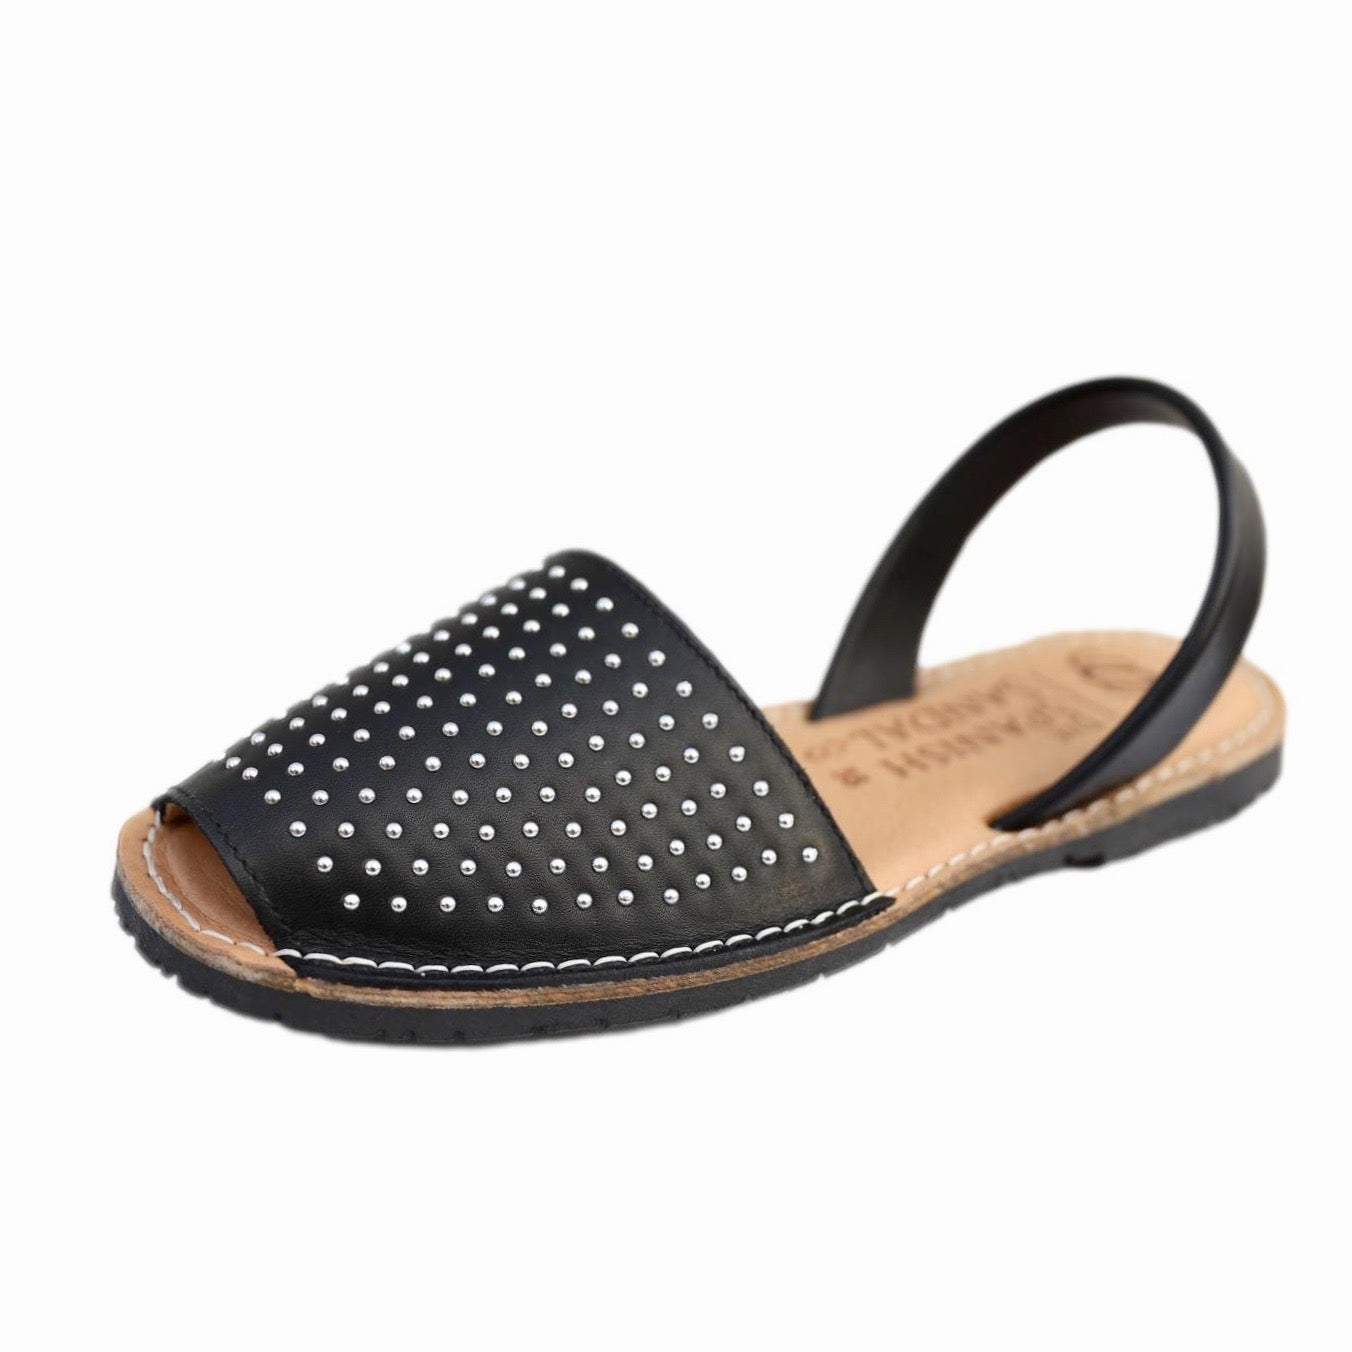 black studded sandals - angle view